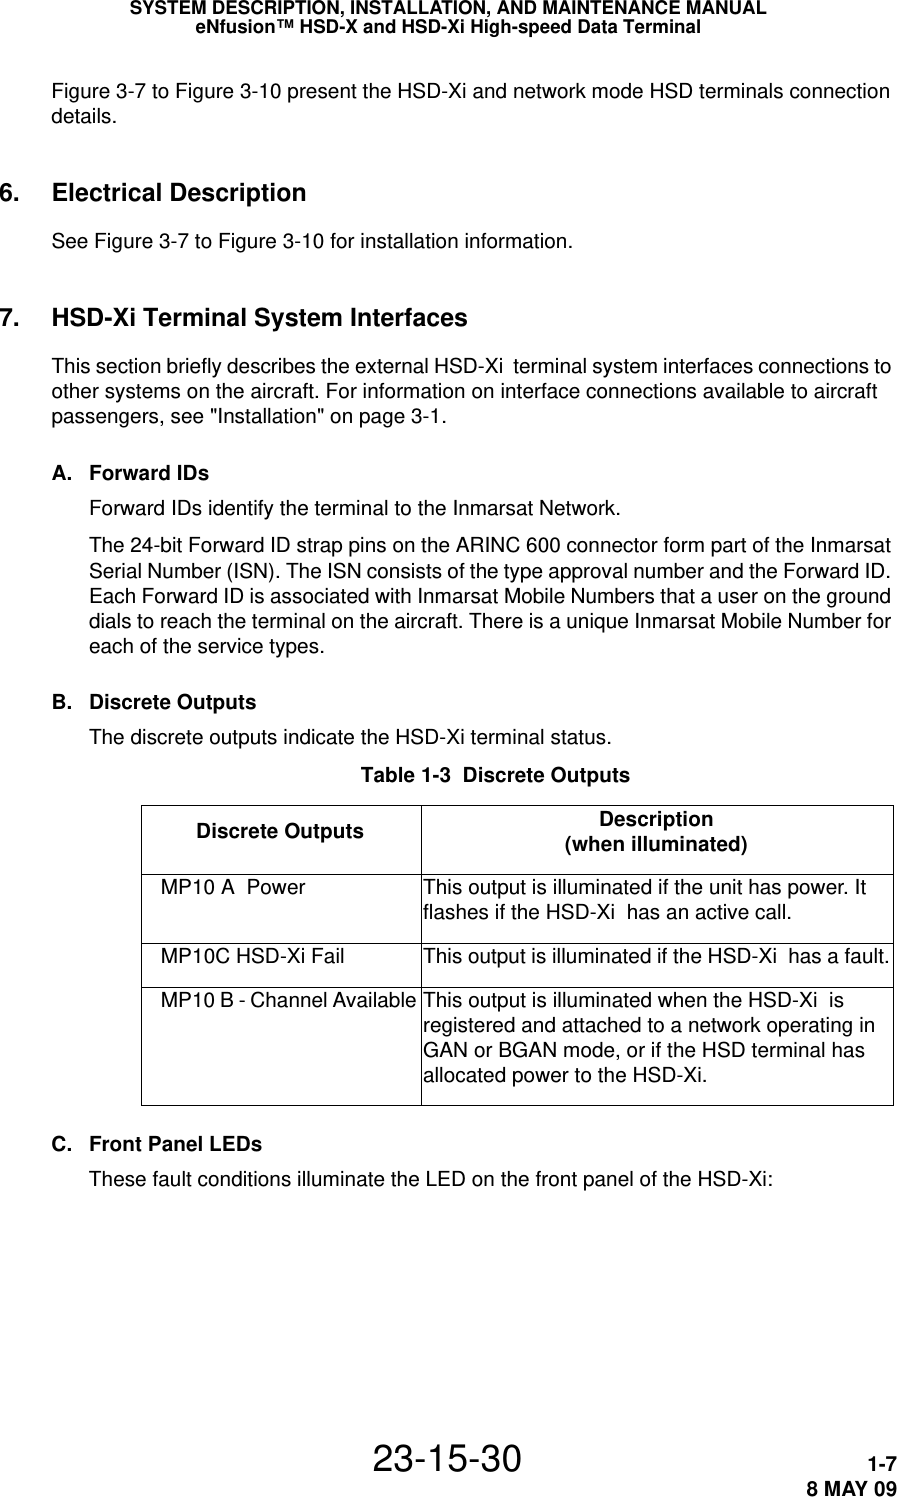 SYSTEM DESCRIPTION, INSTALLATION, AND MAINTENANCE MANUALeNfusion™ HSD-X and HSD-Xi High-speed Data Terminal23-15-30 1-78 MAY 09Figure 3-7 to Figure 3-10 present the HSD-Xi and network mode HSD terminals connection details.6. Electrical DescriptionSee Figure 3-7 to Figure 3-10 for installation information.7. HSD-Xi Terminal System InterfacesThis section briefly describes the external HSD-Xi  terminal system interfaces connections to other systems on the aircraft. For information on interface connections available to aircraft passengers, see &quot;Installation&quot; on page 3-1.A. Forward IDsForward IDs identify the terminal to the Inmarsat Network.The 24-bit Forward ID strap pins on the ARINC 600 connector form part of the Inmarsat Serial Number (ISN). The ISN consists of the type approval number and the Forward ID. Each Forward ID is associated with Inmarsat Mobile Numbers that a user on the ground dials to reach the terminal on the aircraft. There is a unique Inmarsat Mobile Number for each of the service types.B. Discrete OutputsThe discrete outputs indicate the HSD-Xi terminal status. Table 1-3  Discrete Outputs Description (when illuminated)   MP10 A  Power This output is illuminated if the unit has power. It flashes if the HSD-Xi  has an active call.    MP10C HSD-Xi Fail This output is illuminated if the HSD-Xi  has a fault.   MP10 B - Channel Available This output is illuminated when the HSD-Xi  is registered and attached to a network operating in GAN or BGAN mode, or if the HSD terminal has allocated power to the HSD-Xi.Discrete OutputsC. Front Panel LEDsThese fault conditions illuminate the LED on the front panel of the HSD-Xi: